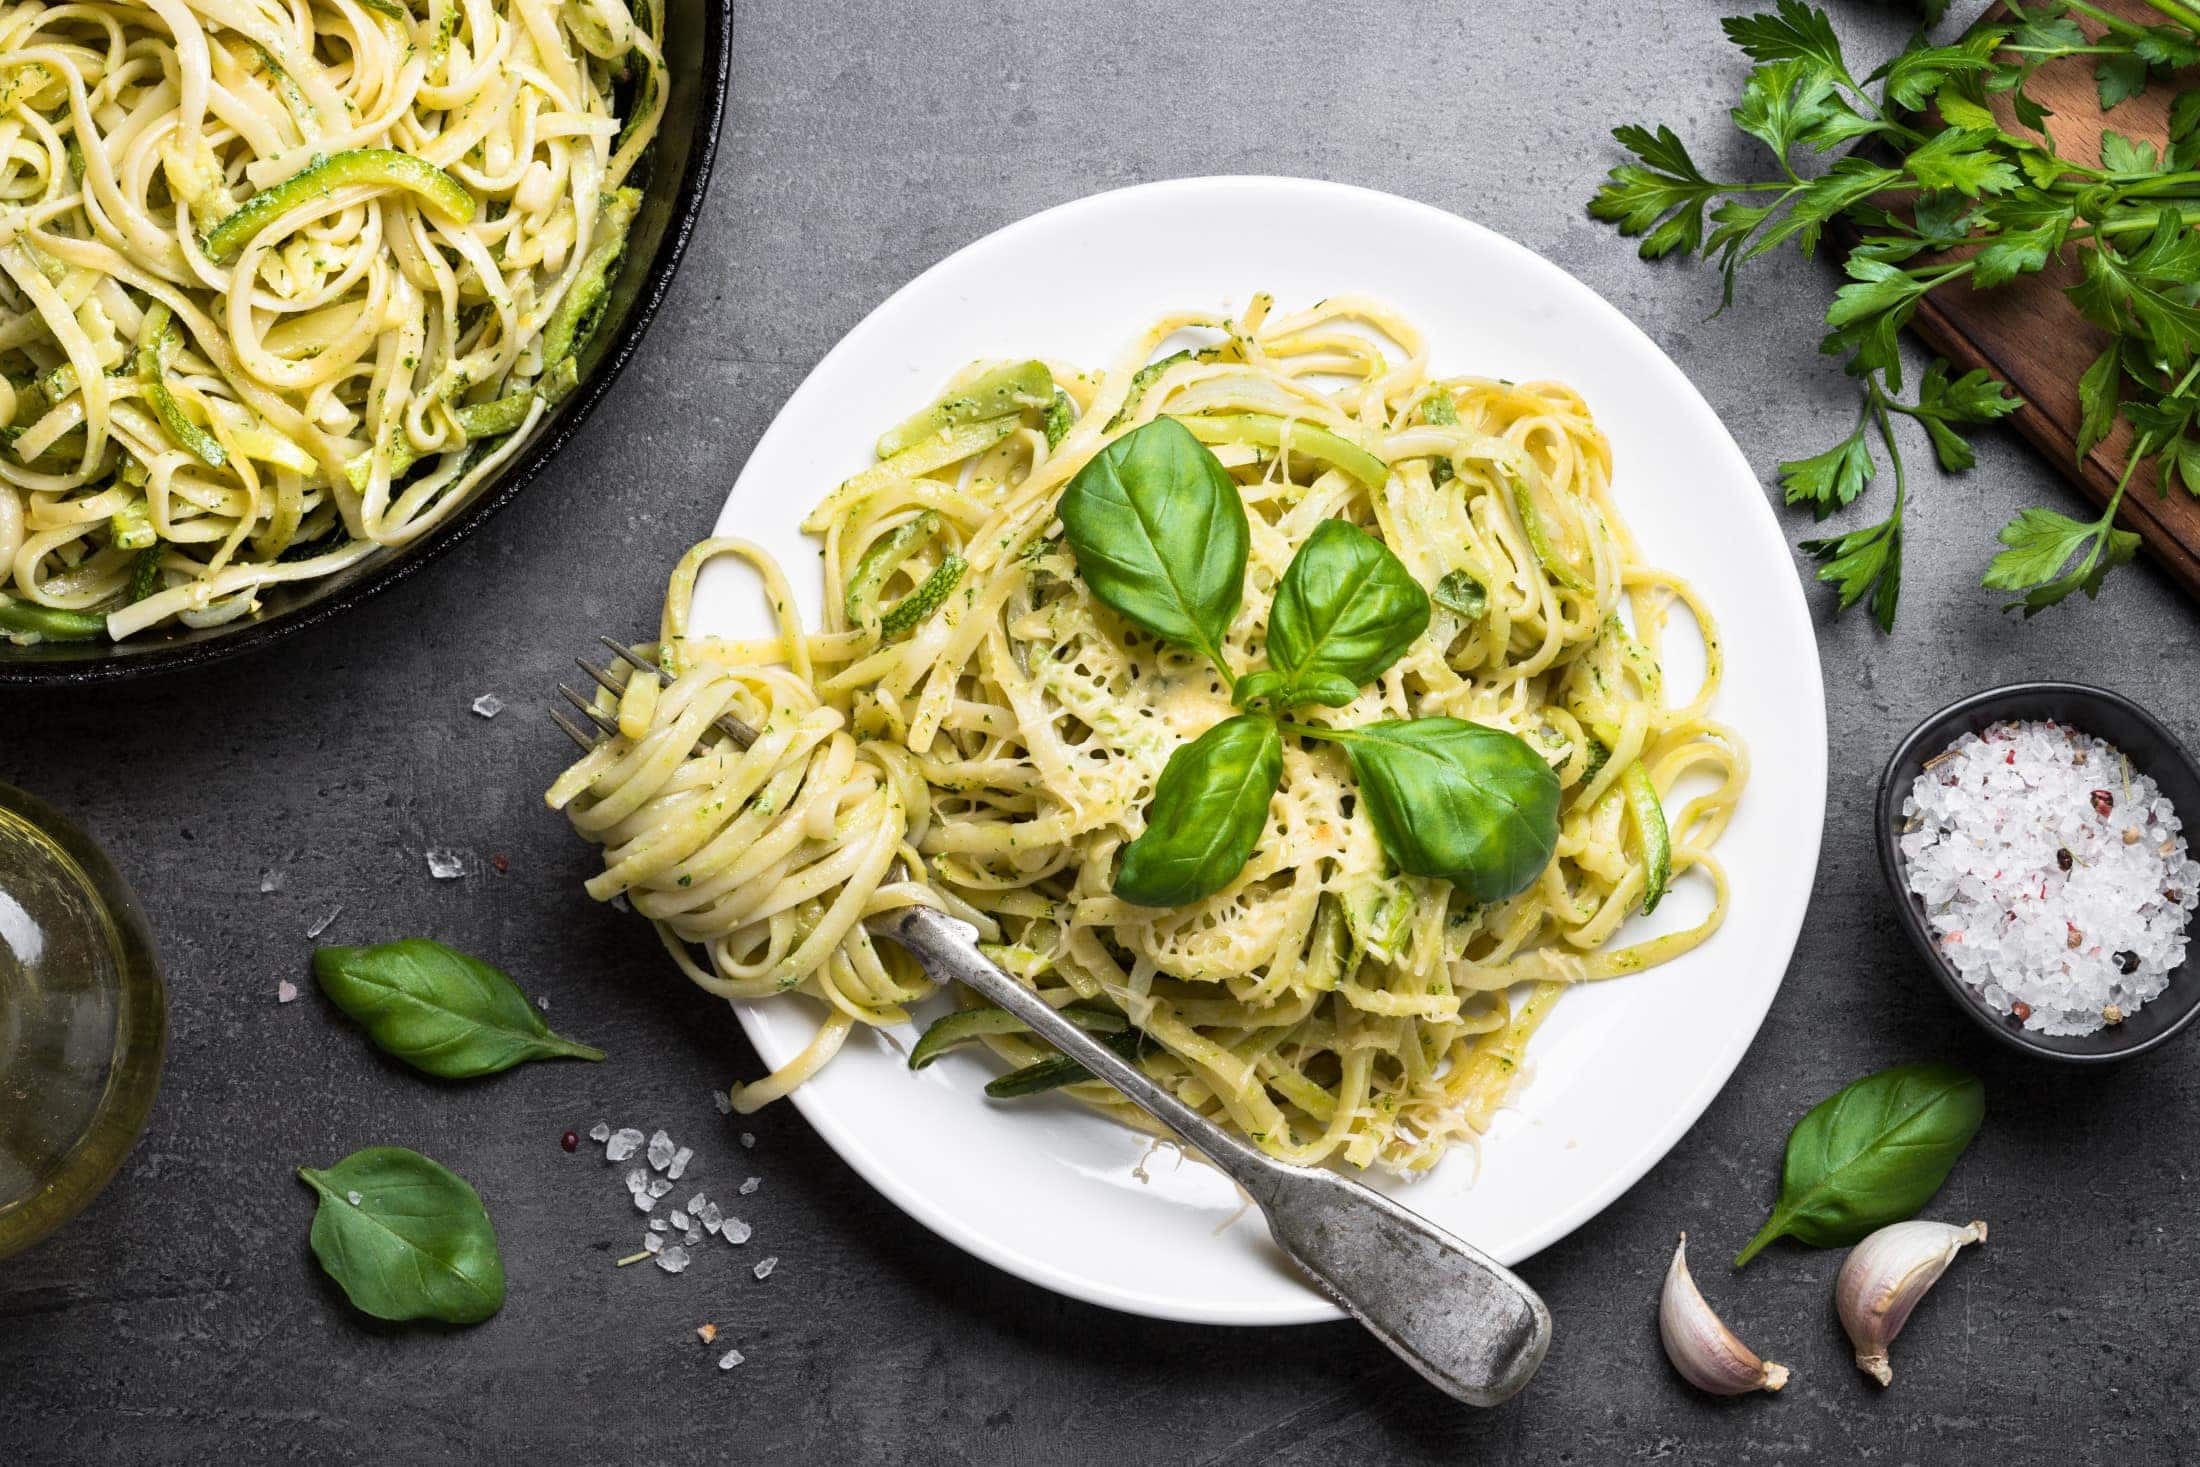 Vegetarian pasta and basil leaves on a white plate with dark background